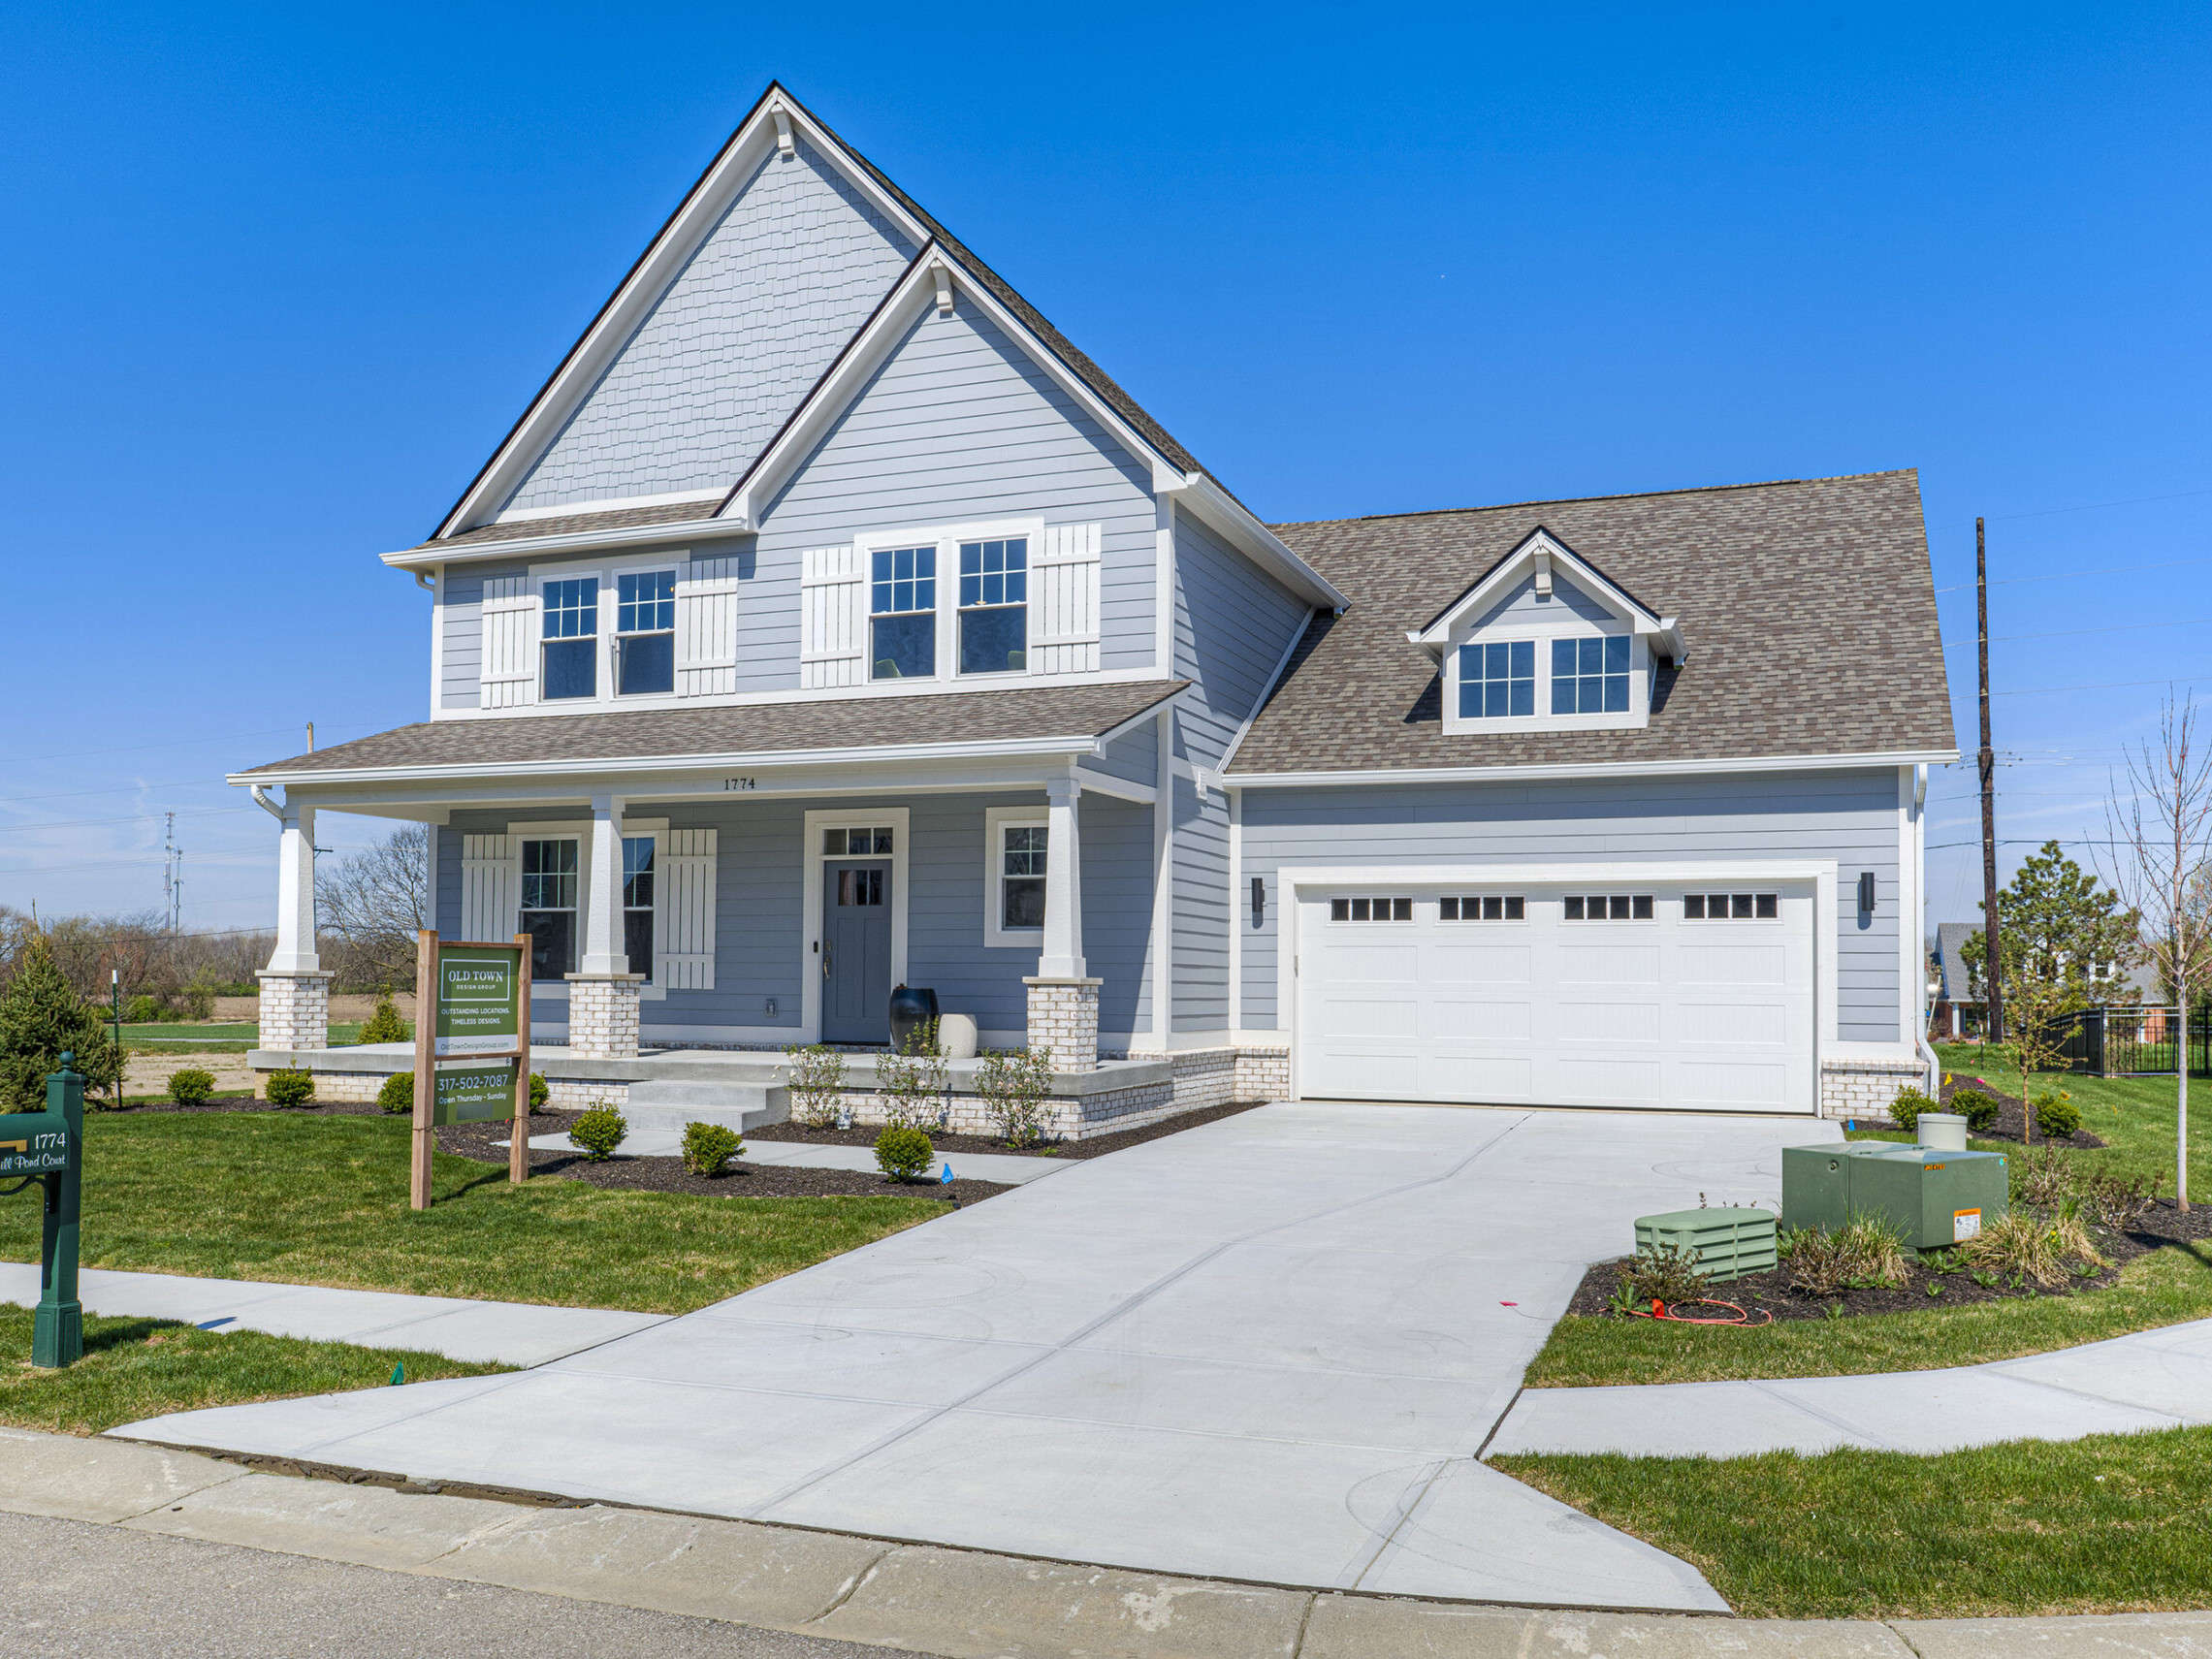 A home with two garages and a driveway, perfect for those in search of a custom-built residence in Fishers or Westfield, Indiana.